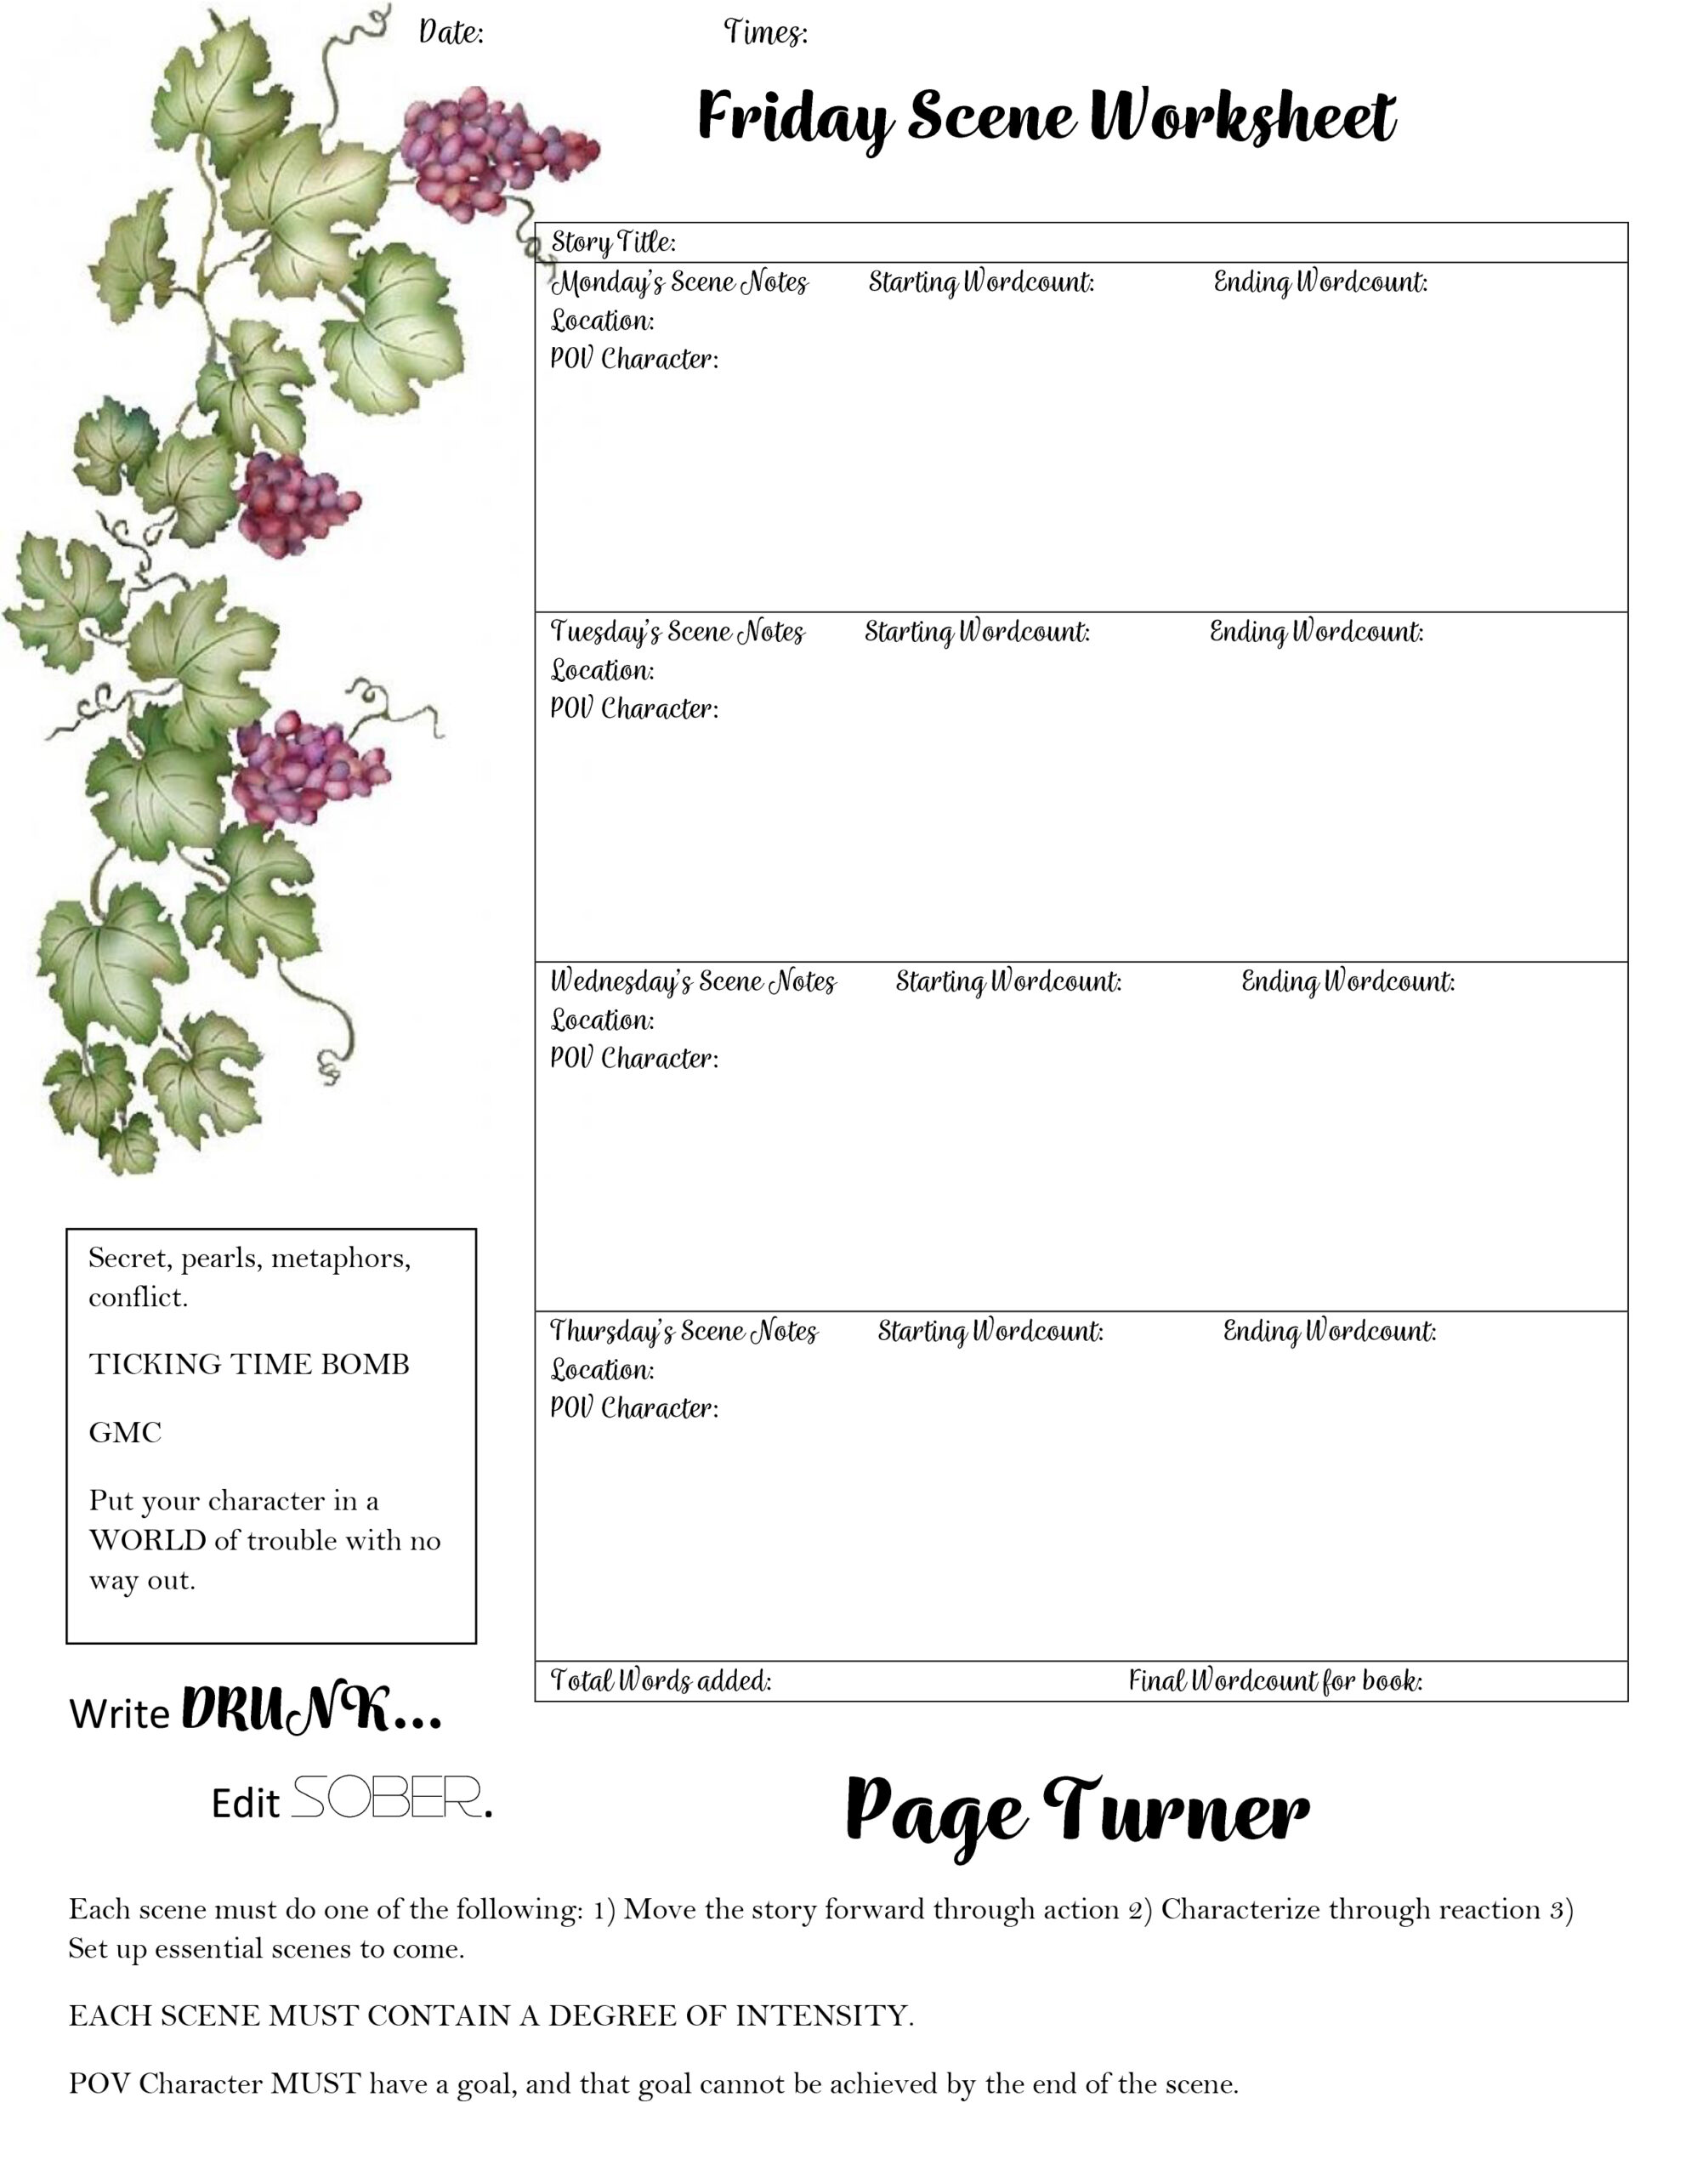 Worksheets For Romance Writers